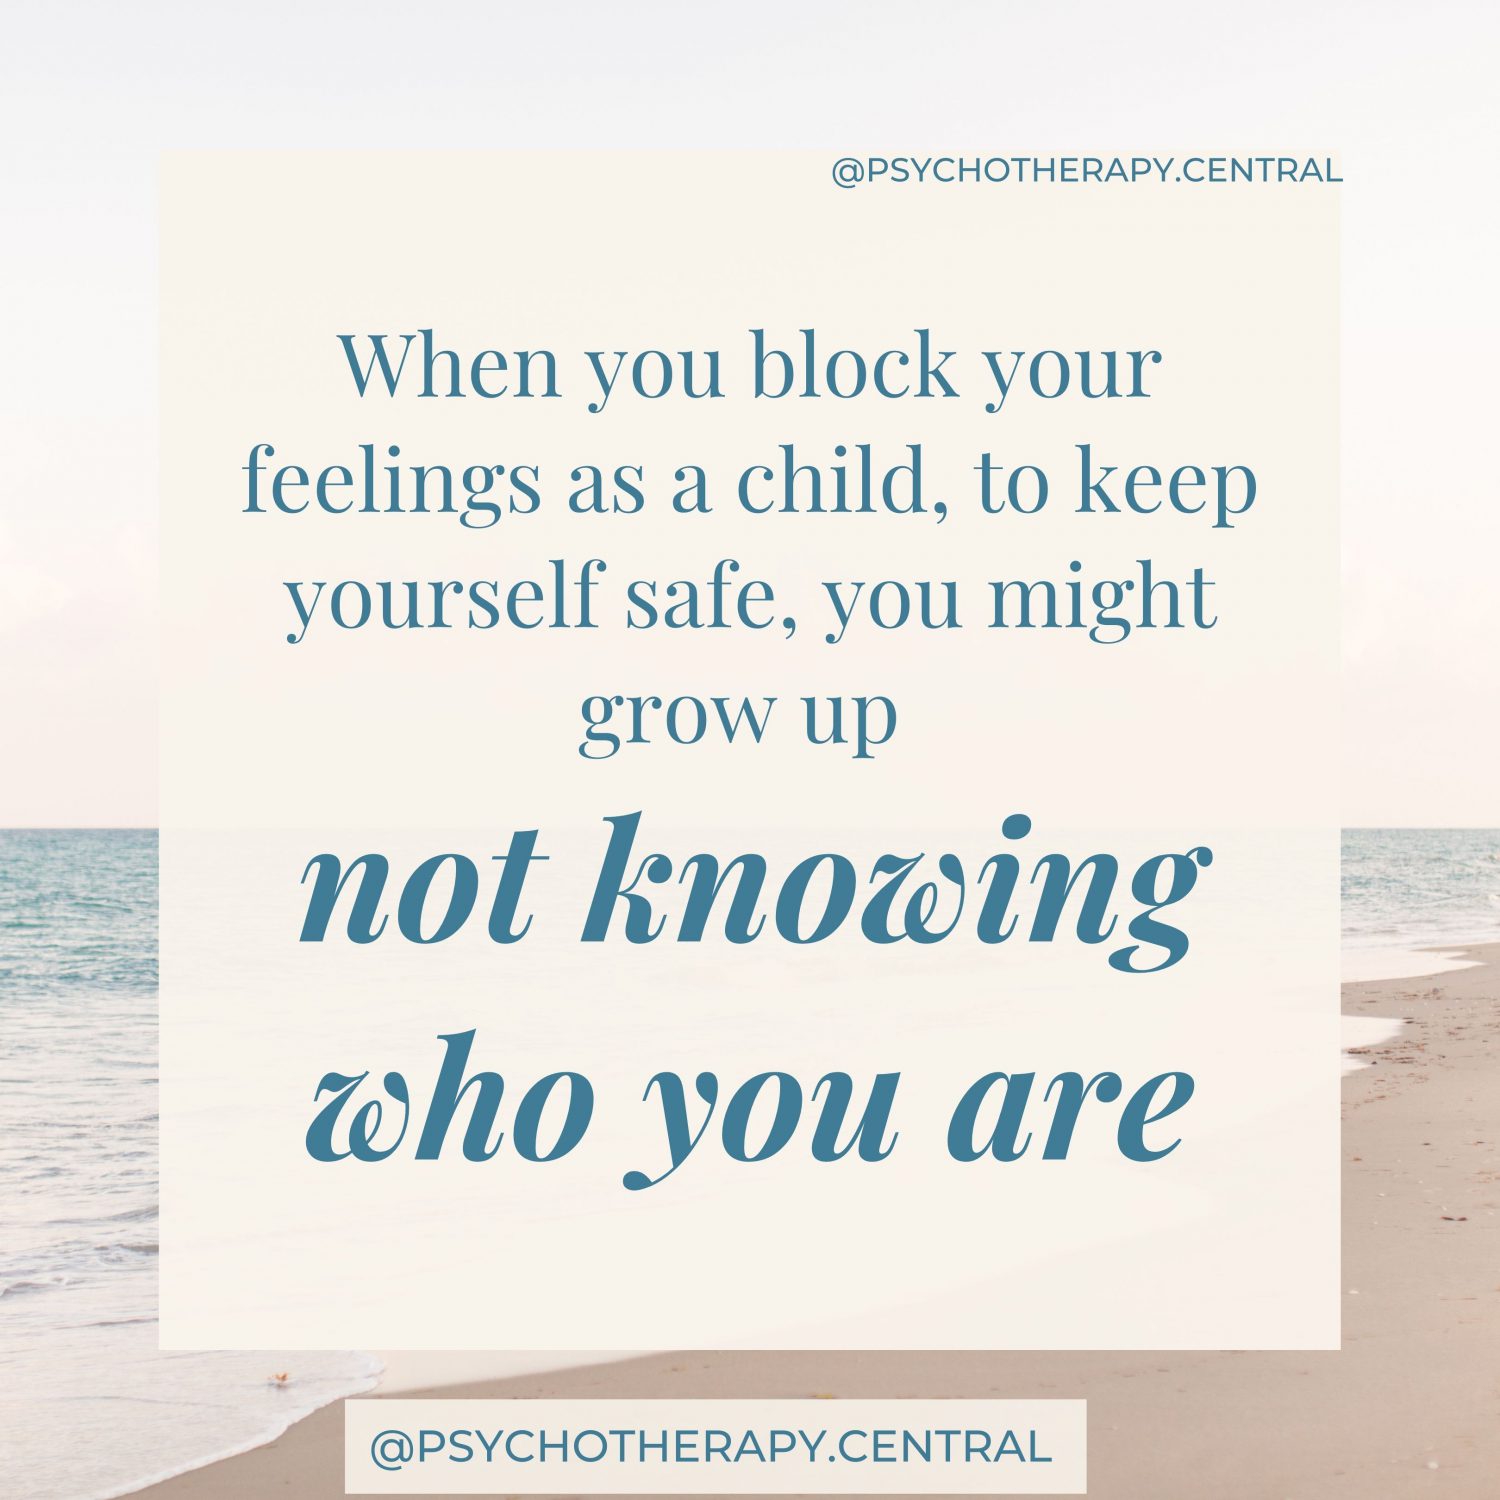 When you block your feelings as a child, to keep yourself safe, you might grow up not knowing who you are.